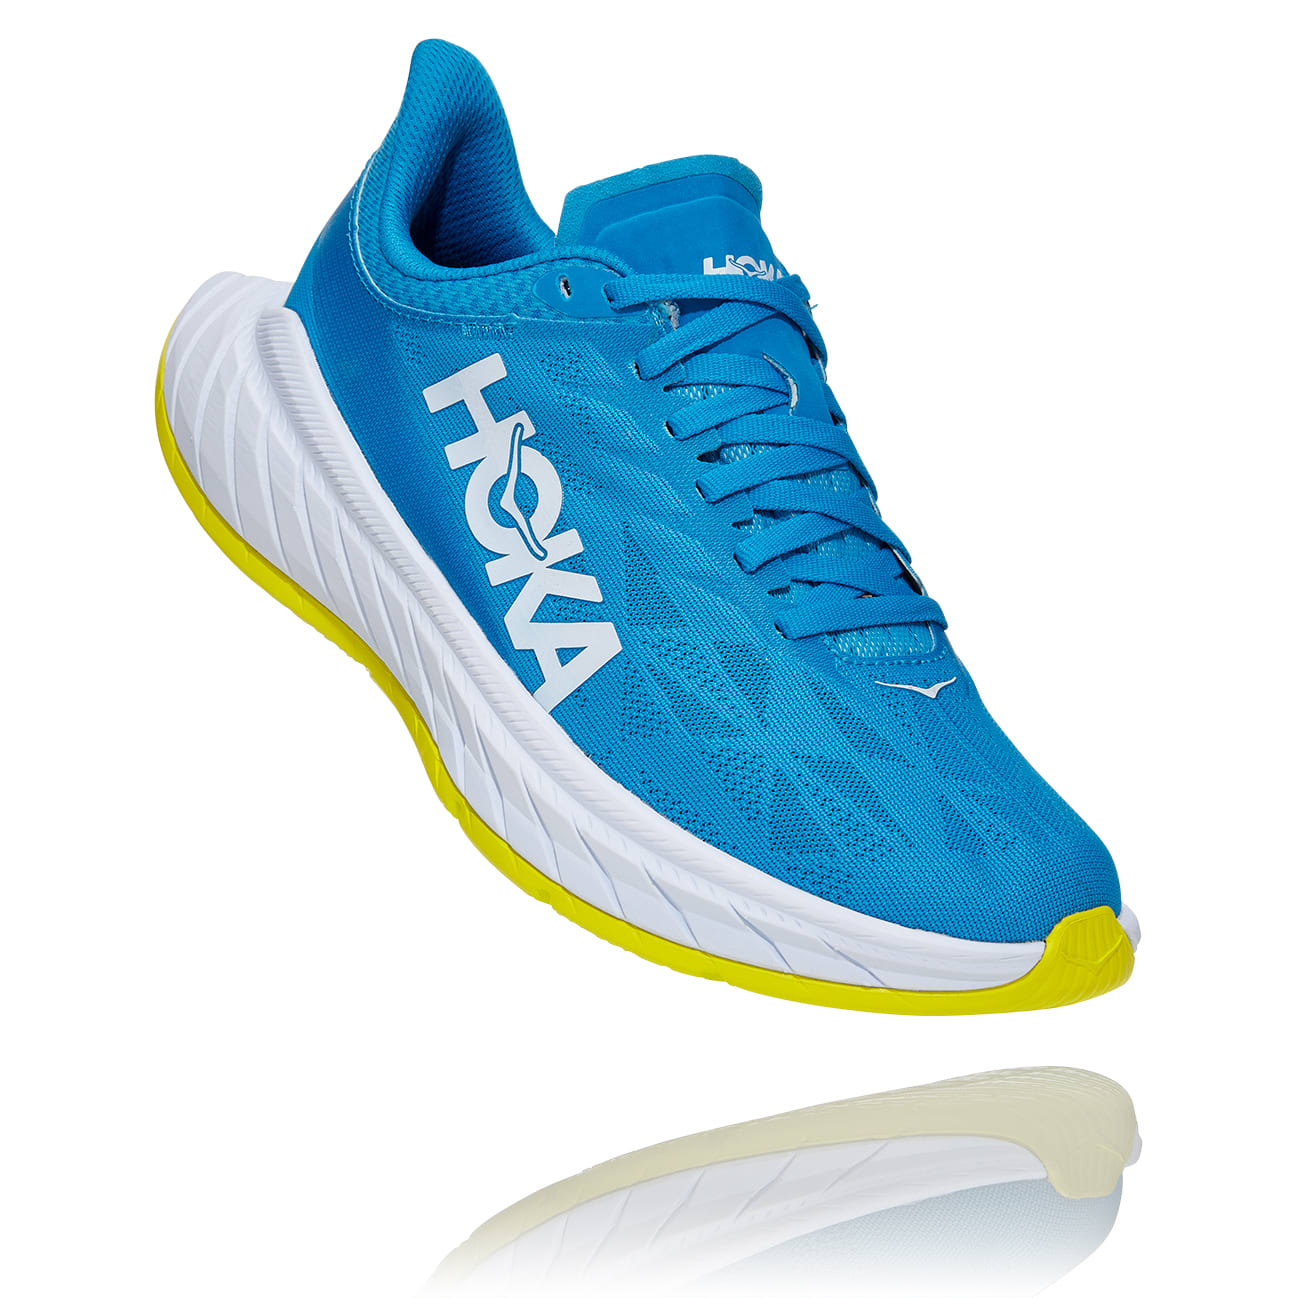 Buy Hoka One One Women's Carbon X 2 from Outnorth